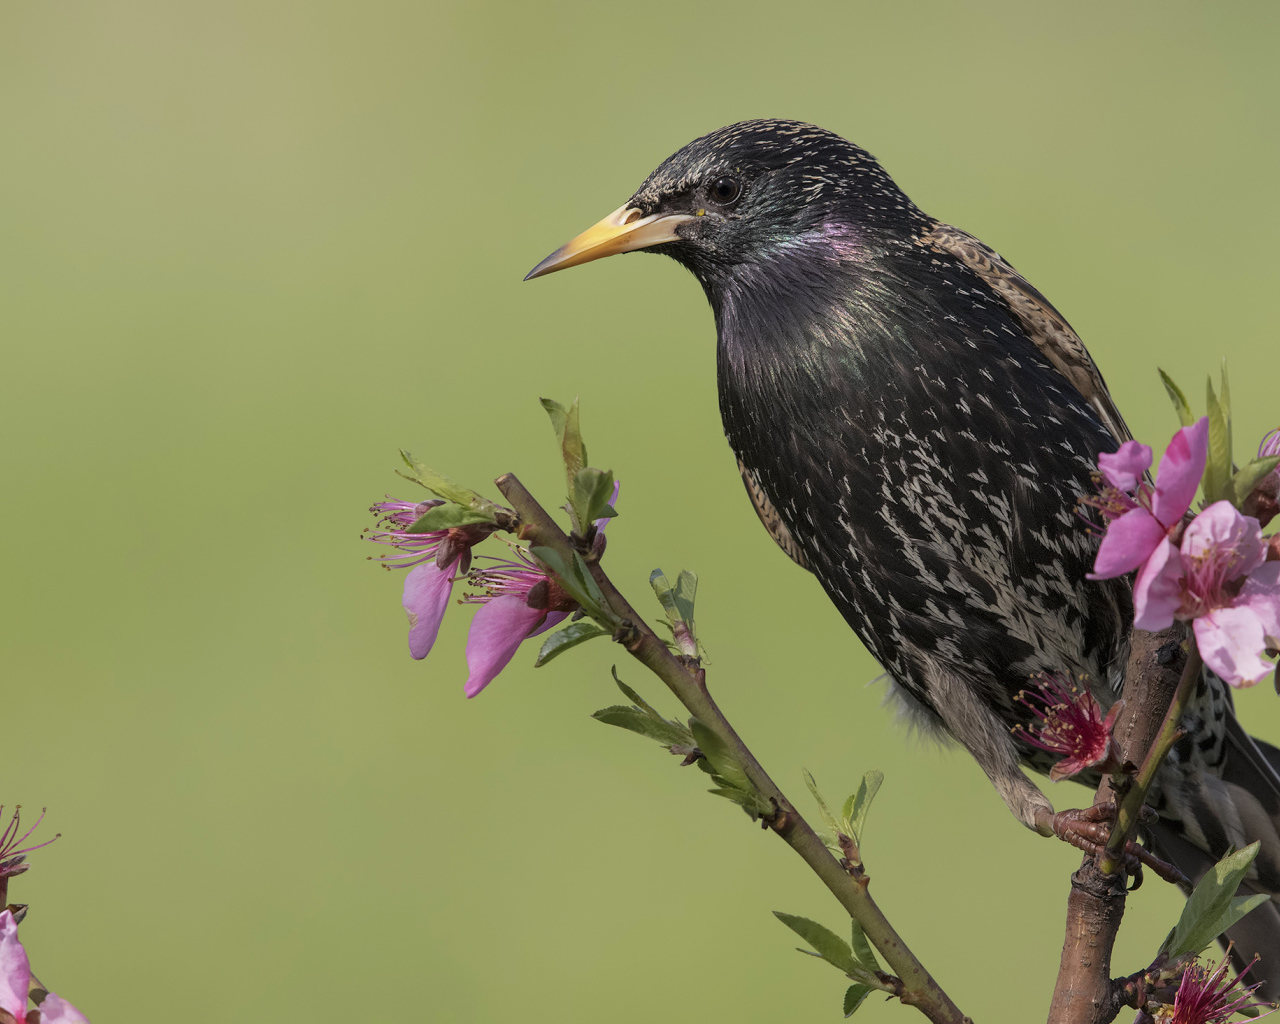 Common black starling sits on a branch with flowers